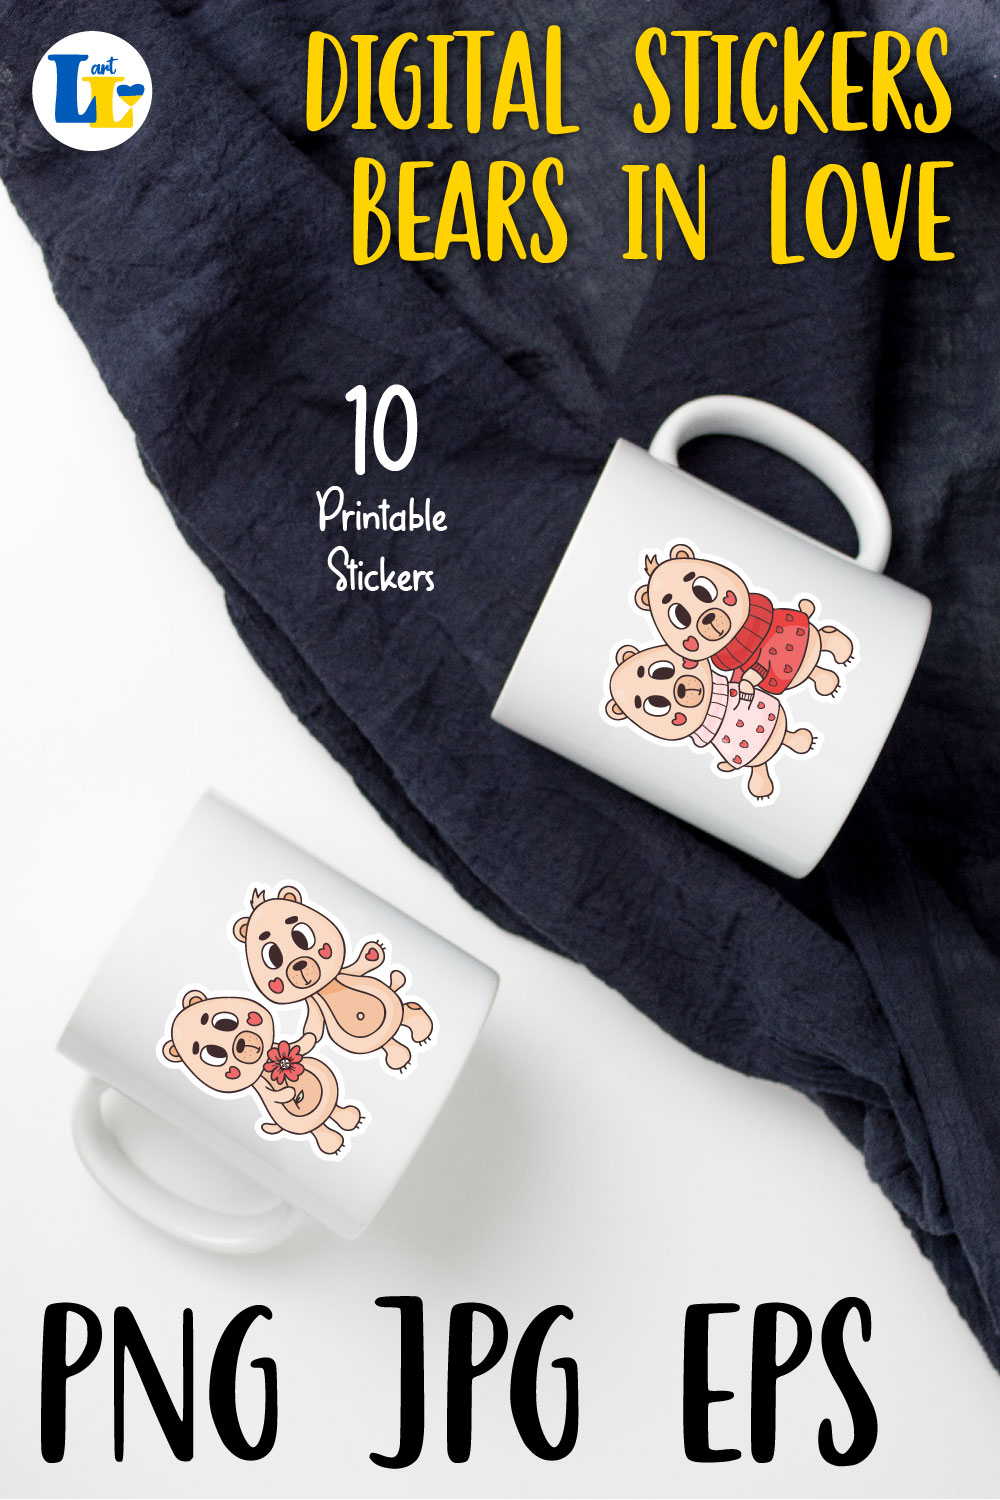 Image of cups with colorful sticker of cute bears